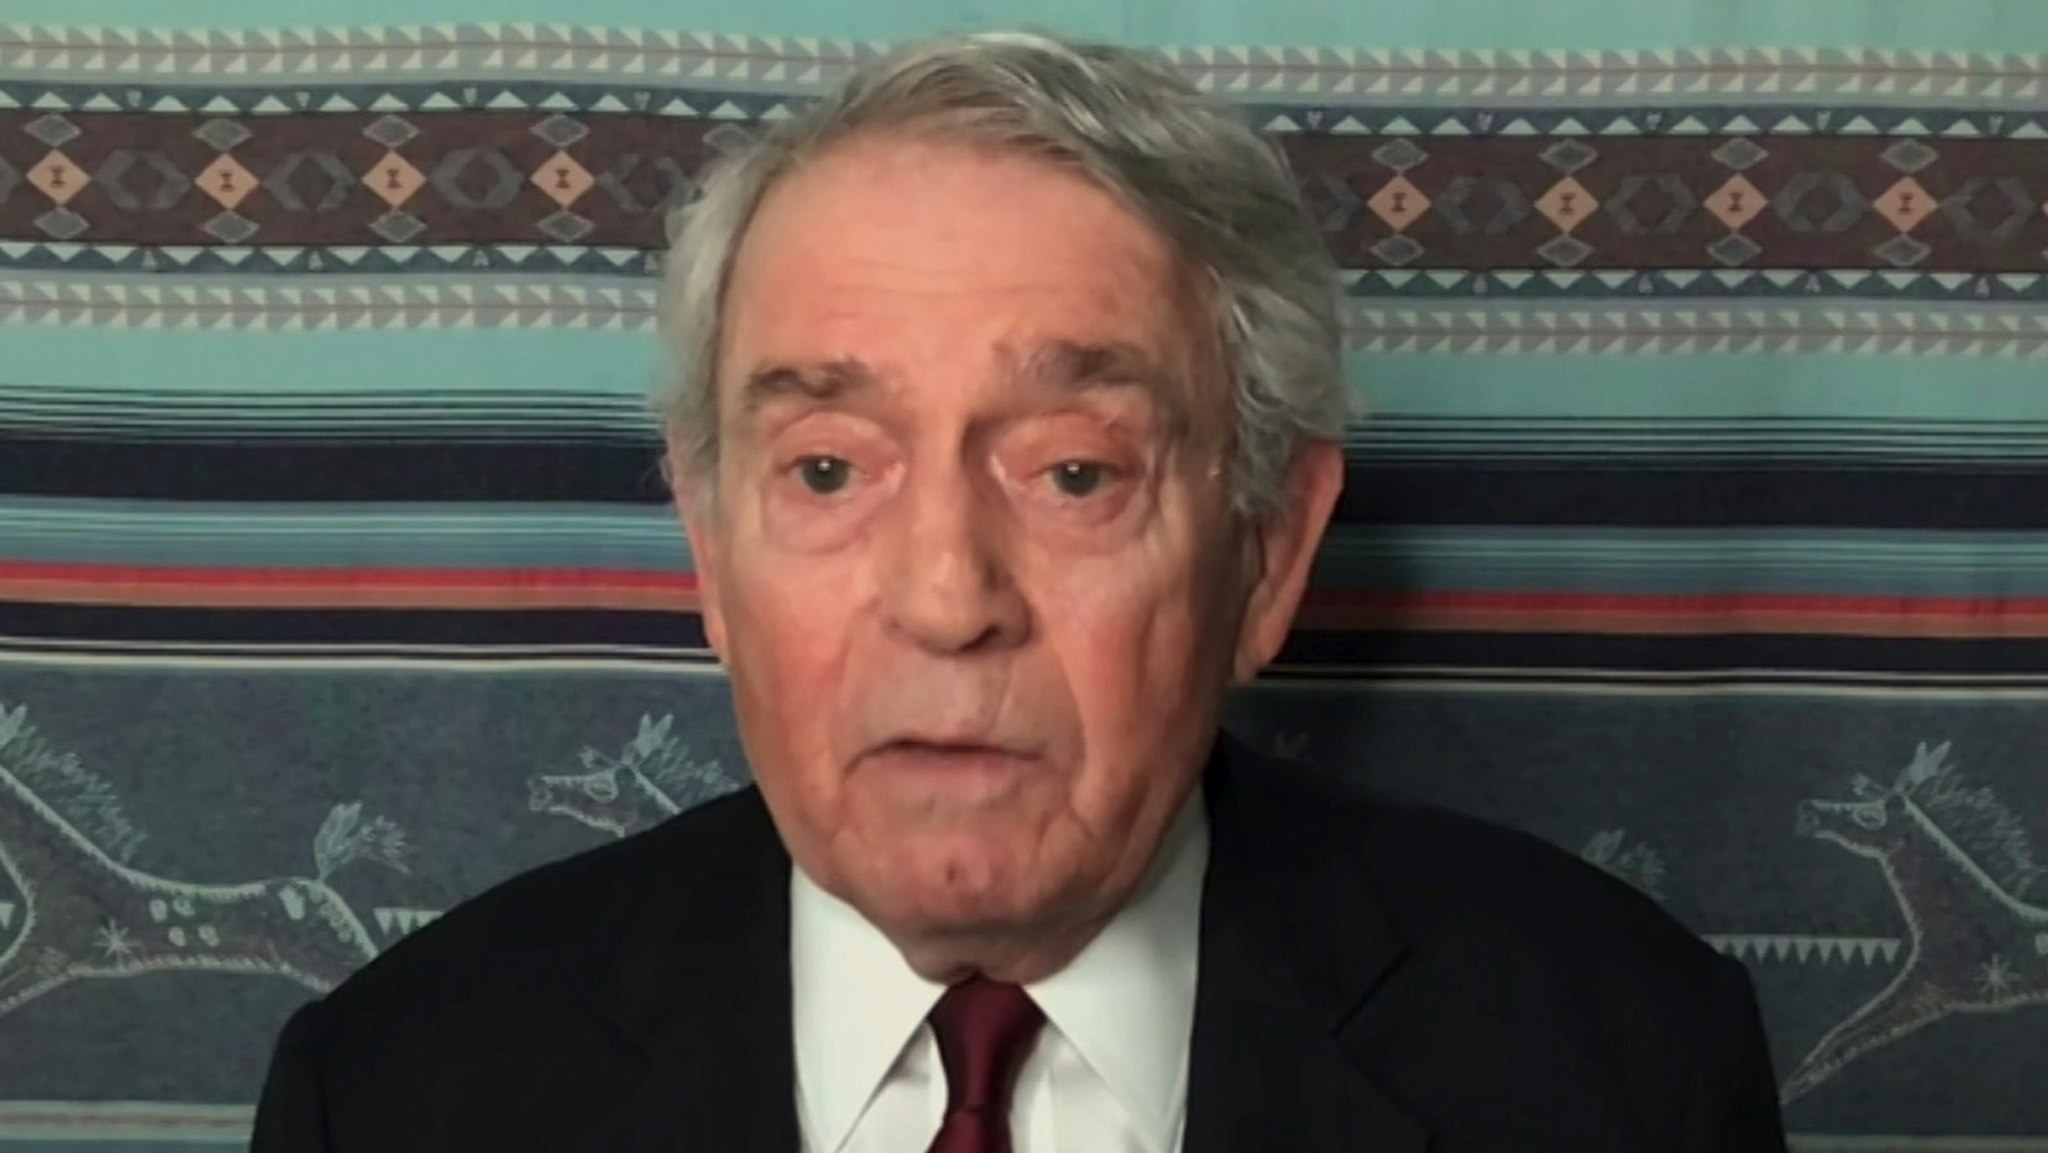 THE TONIGHT SHOW STARRING JIMMY FALLON -- Episode 1381A -- Pictured in this screengrab: Journalist Dan Rather during an interview on January 6, 2021